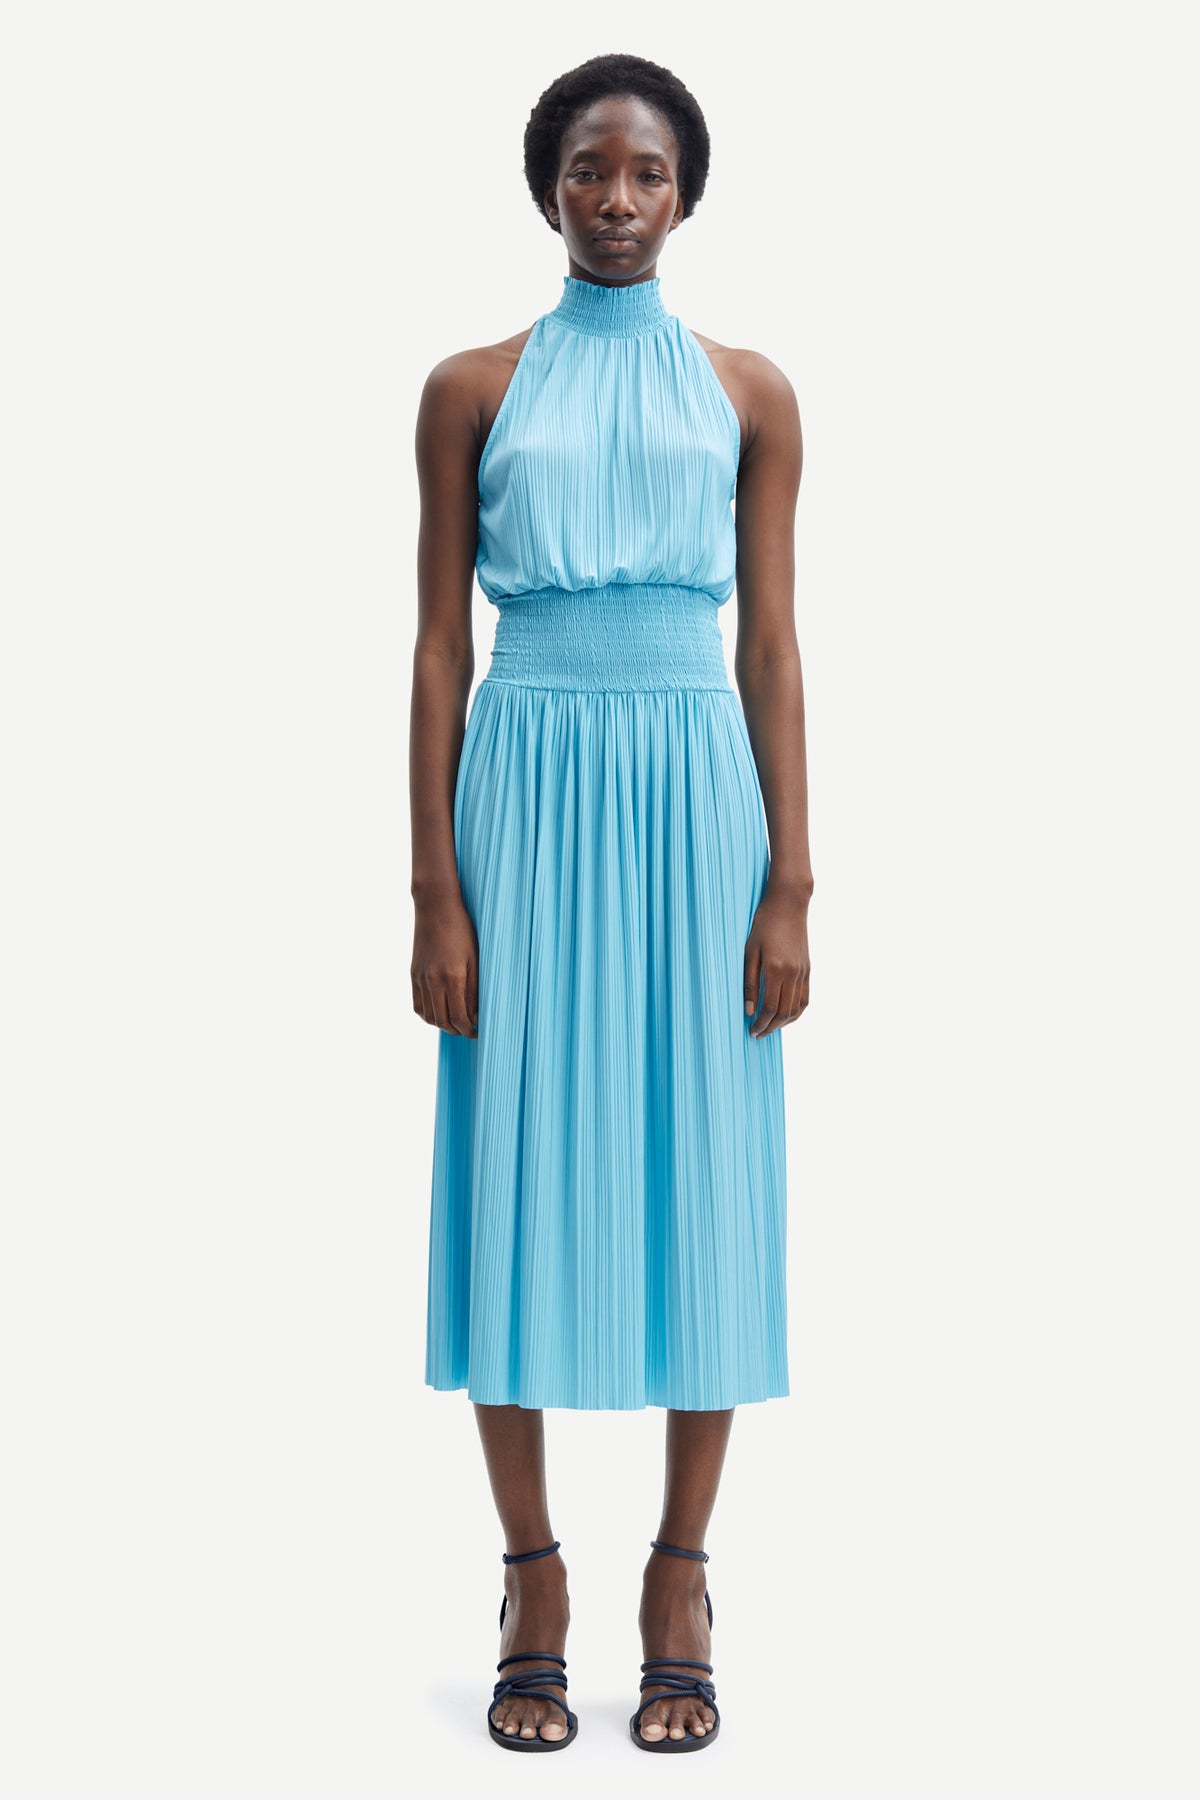 Light blue halterneck top with ruched waist and light pleats throughout midi in length